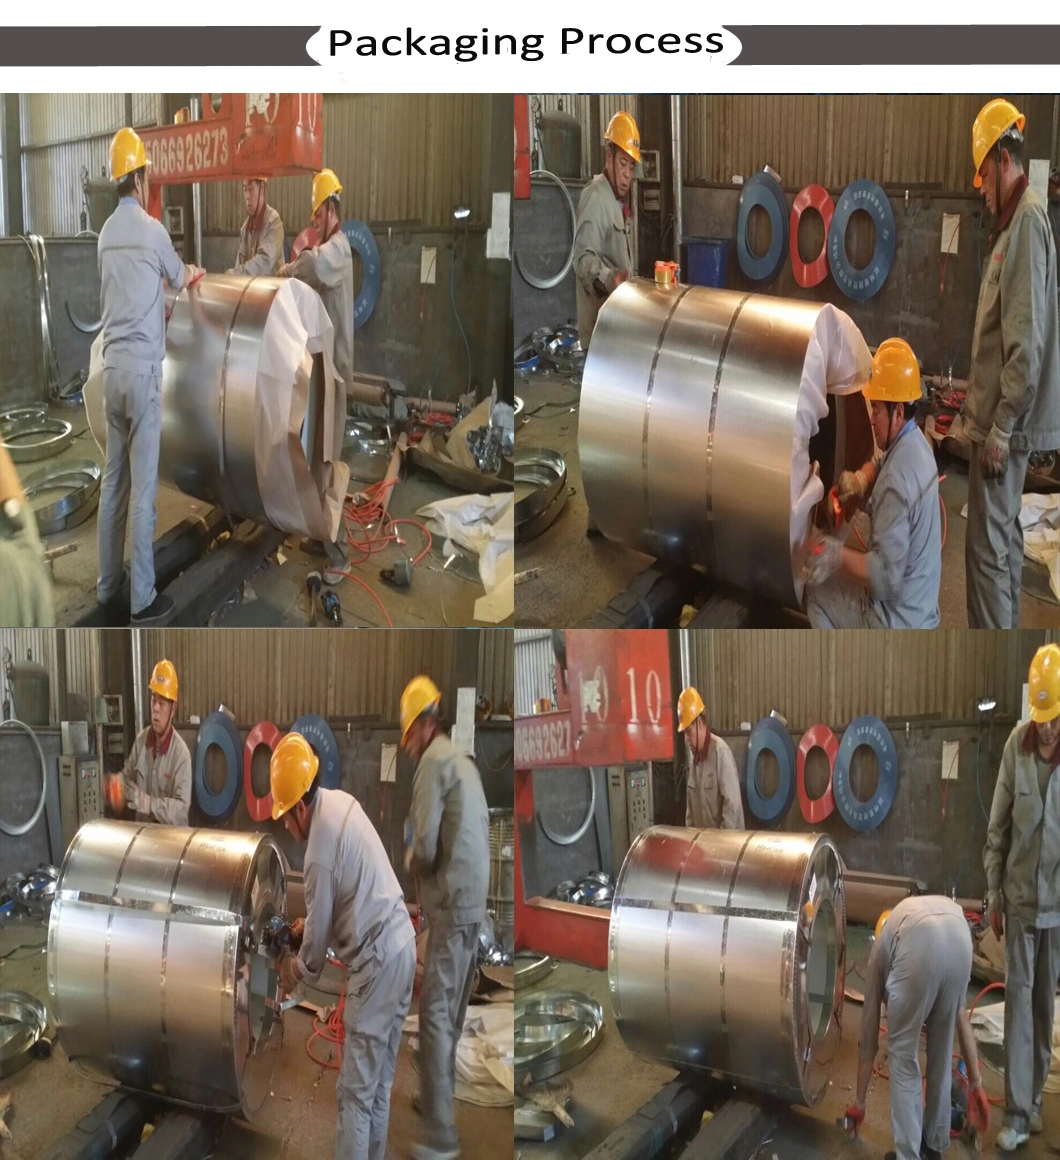 Factory Sale PPGI Color Coated Steel Coil for Roofing Material